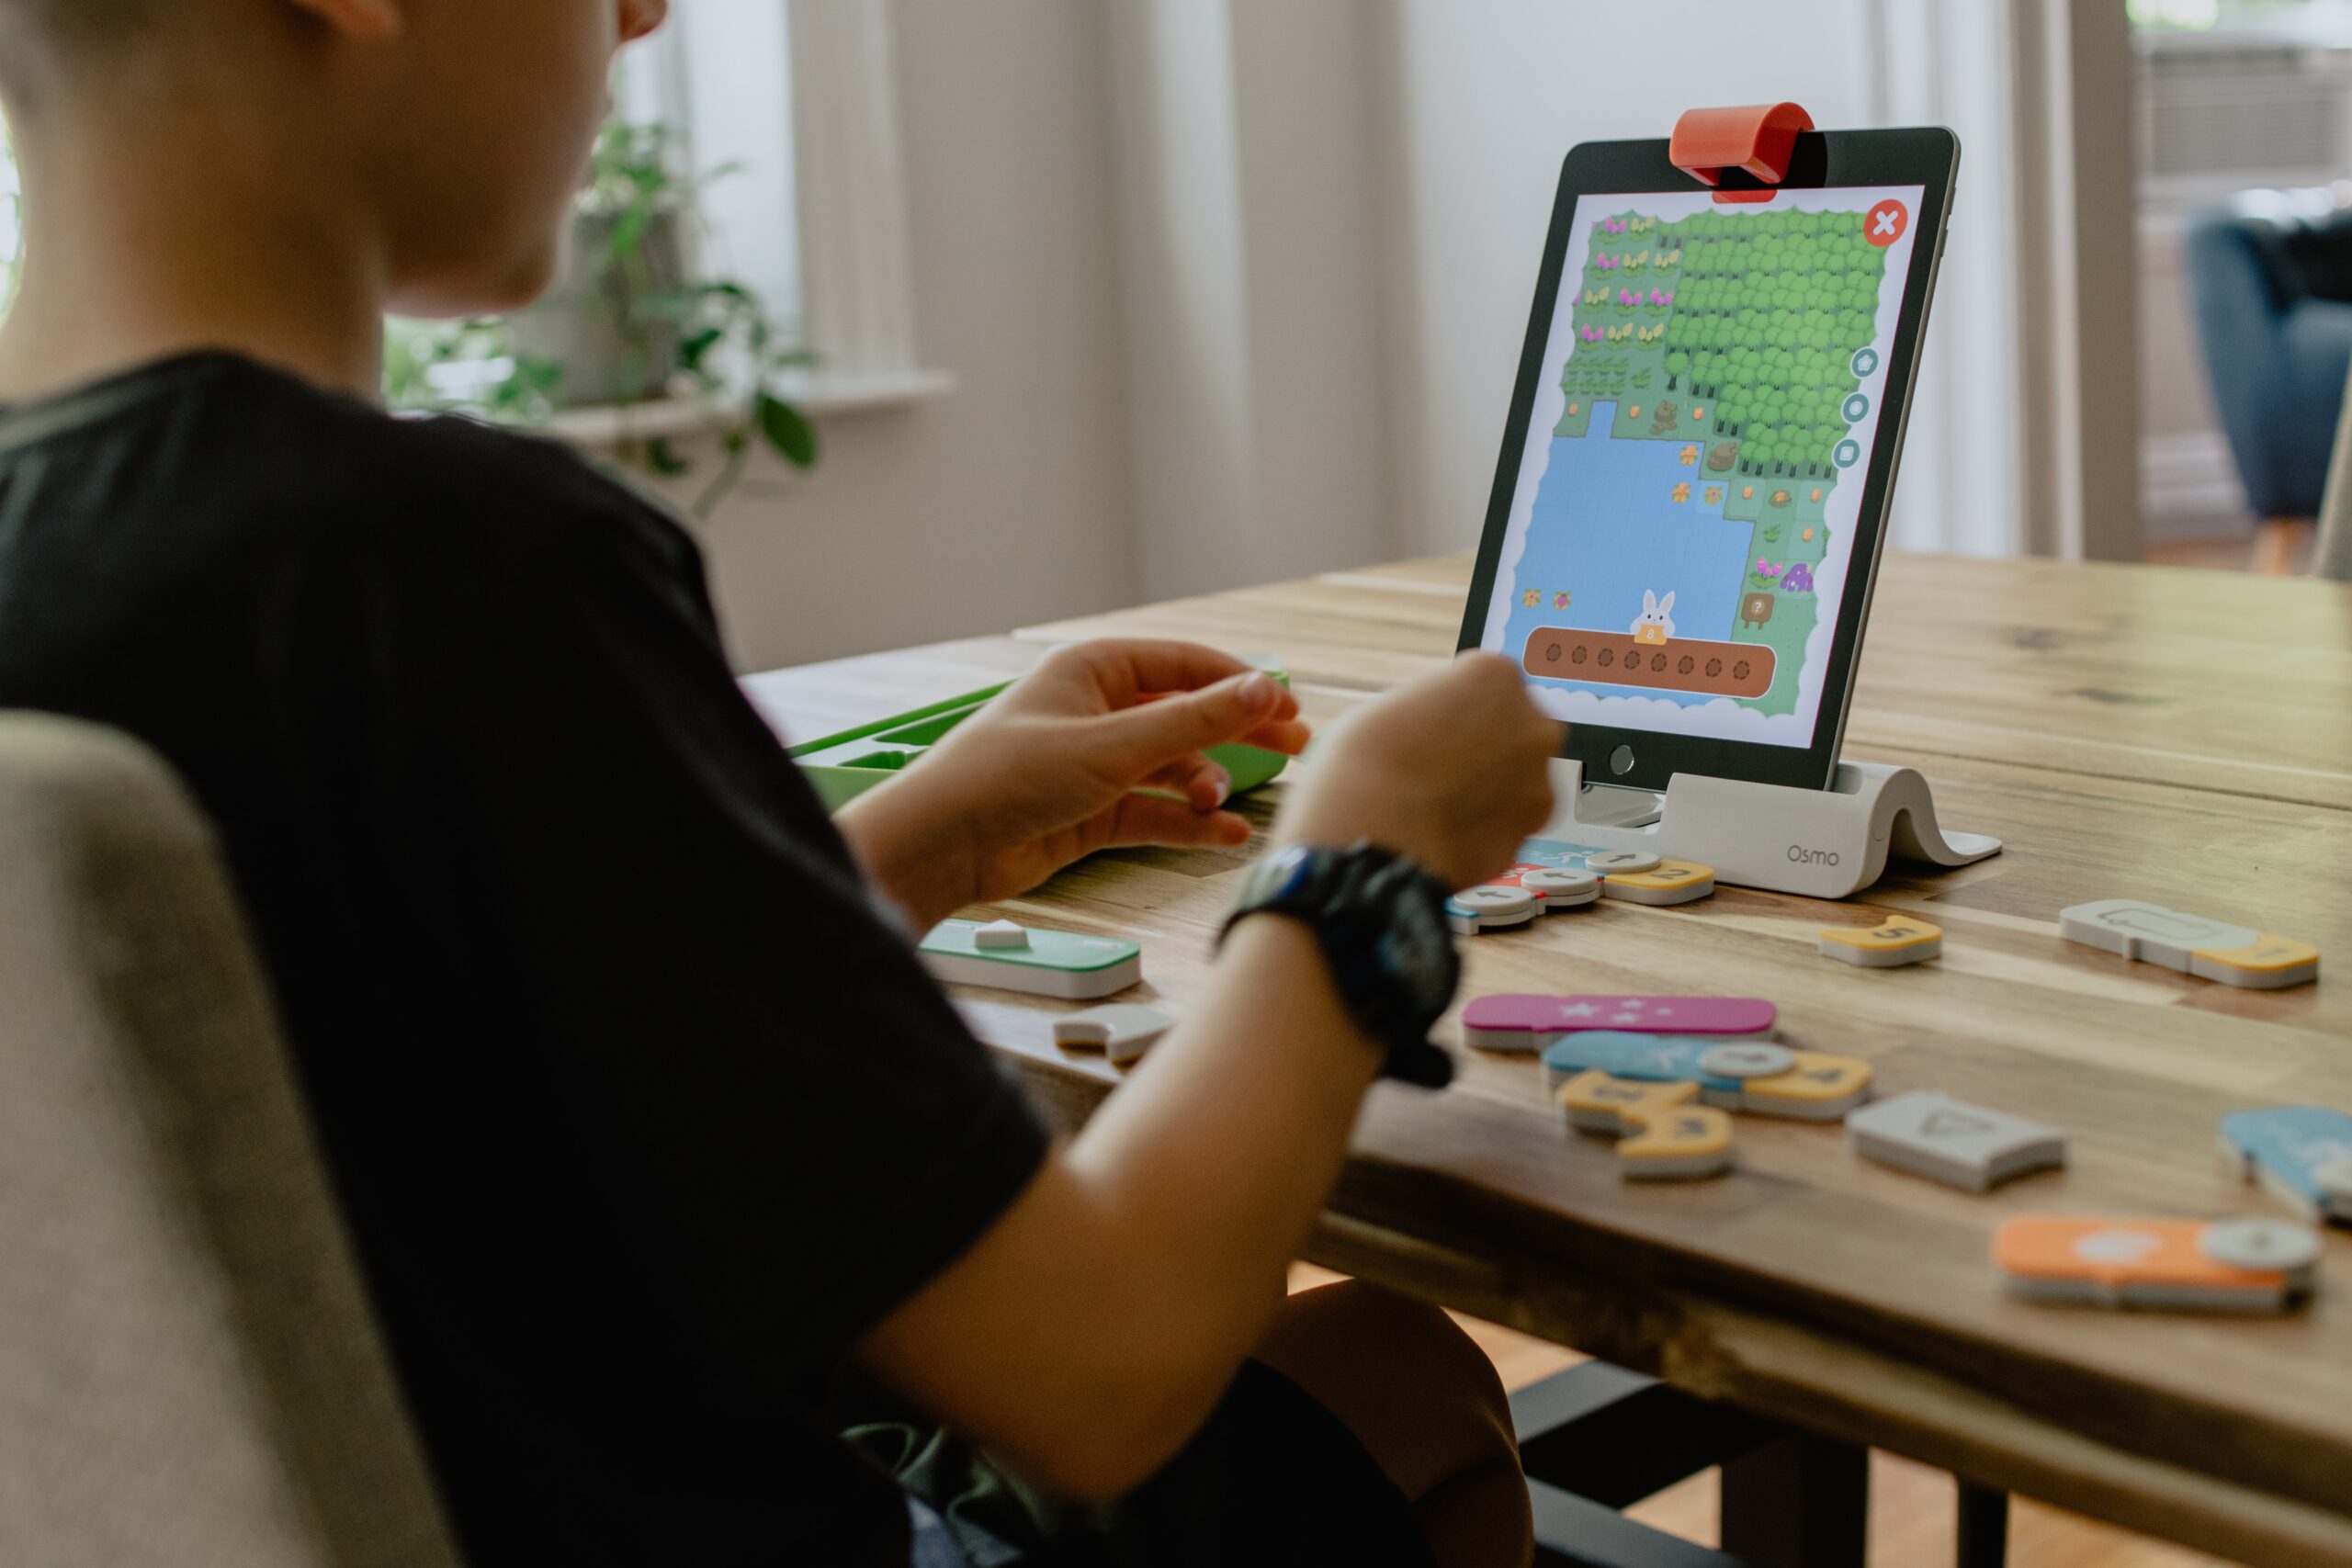 An image of a A kid learning coding through an iPad